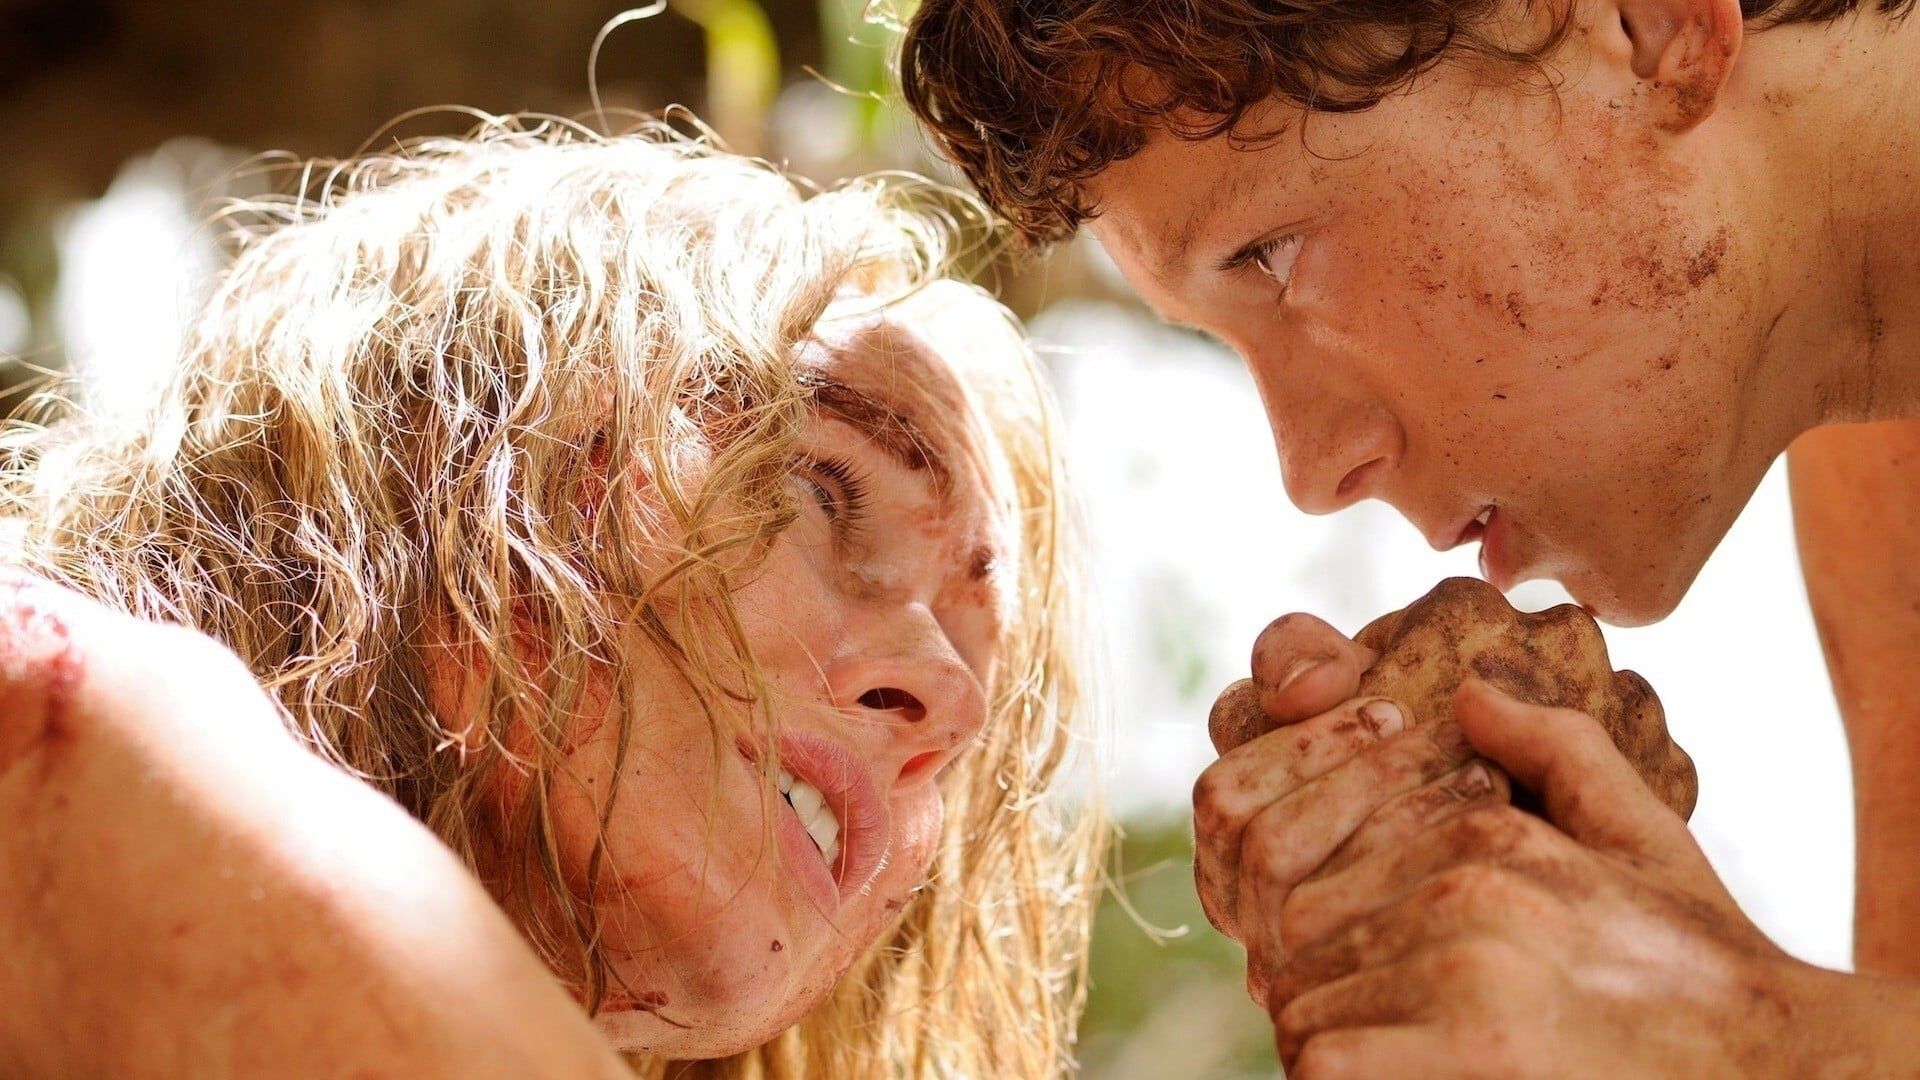 The Impossible's Tom Holland and Naomi Watts hold hands, both covered in grime.